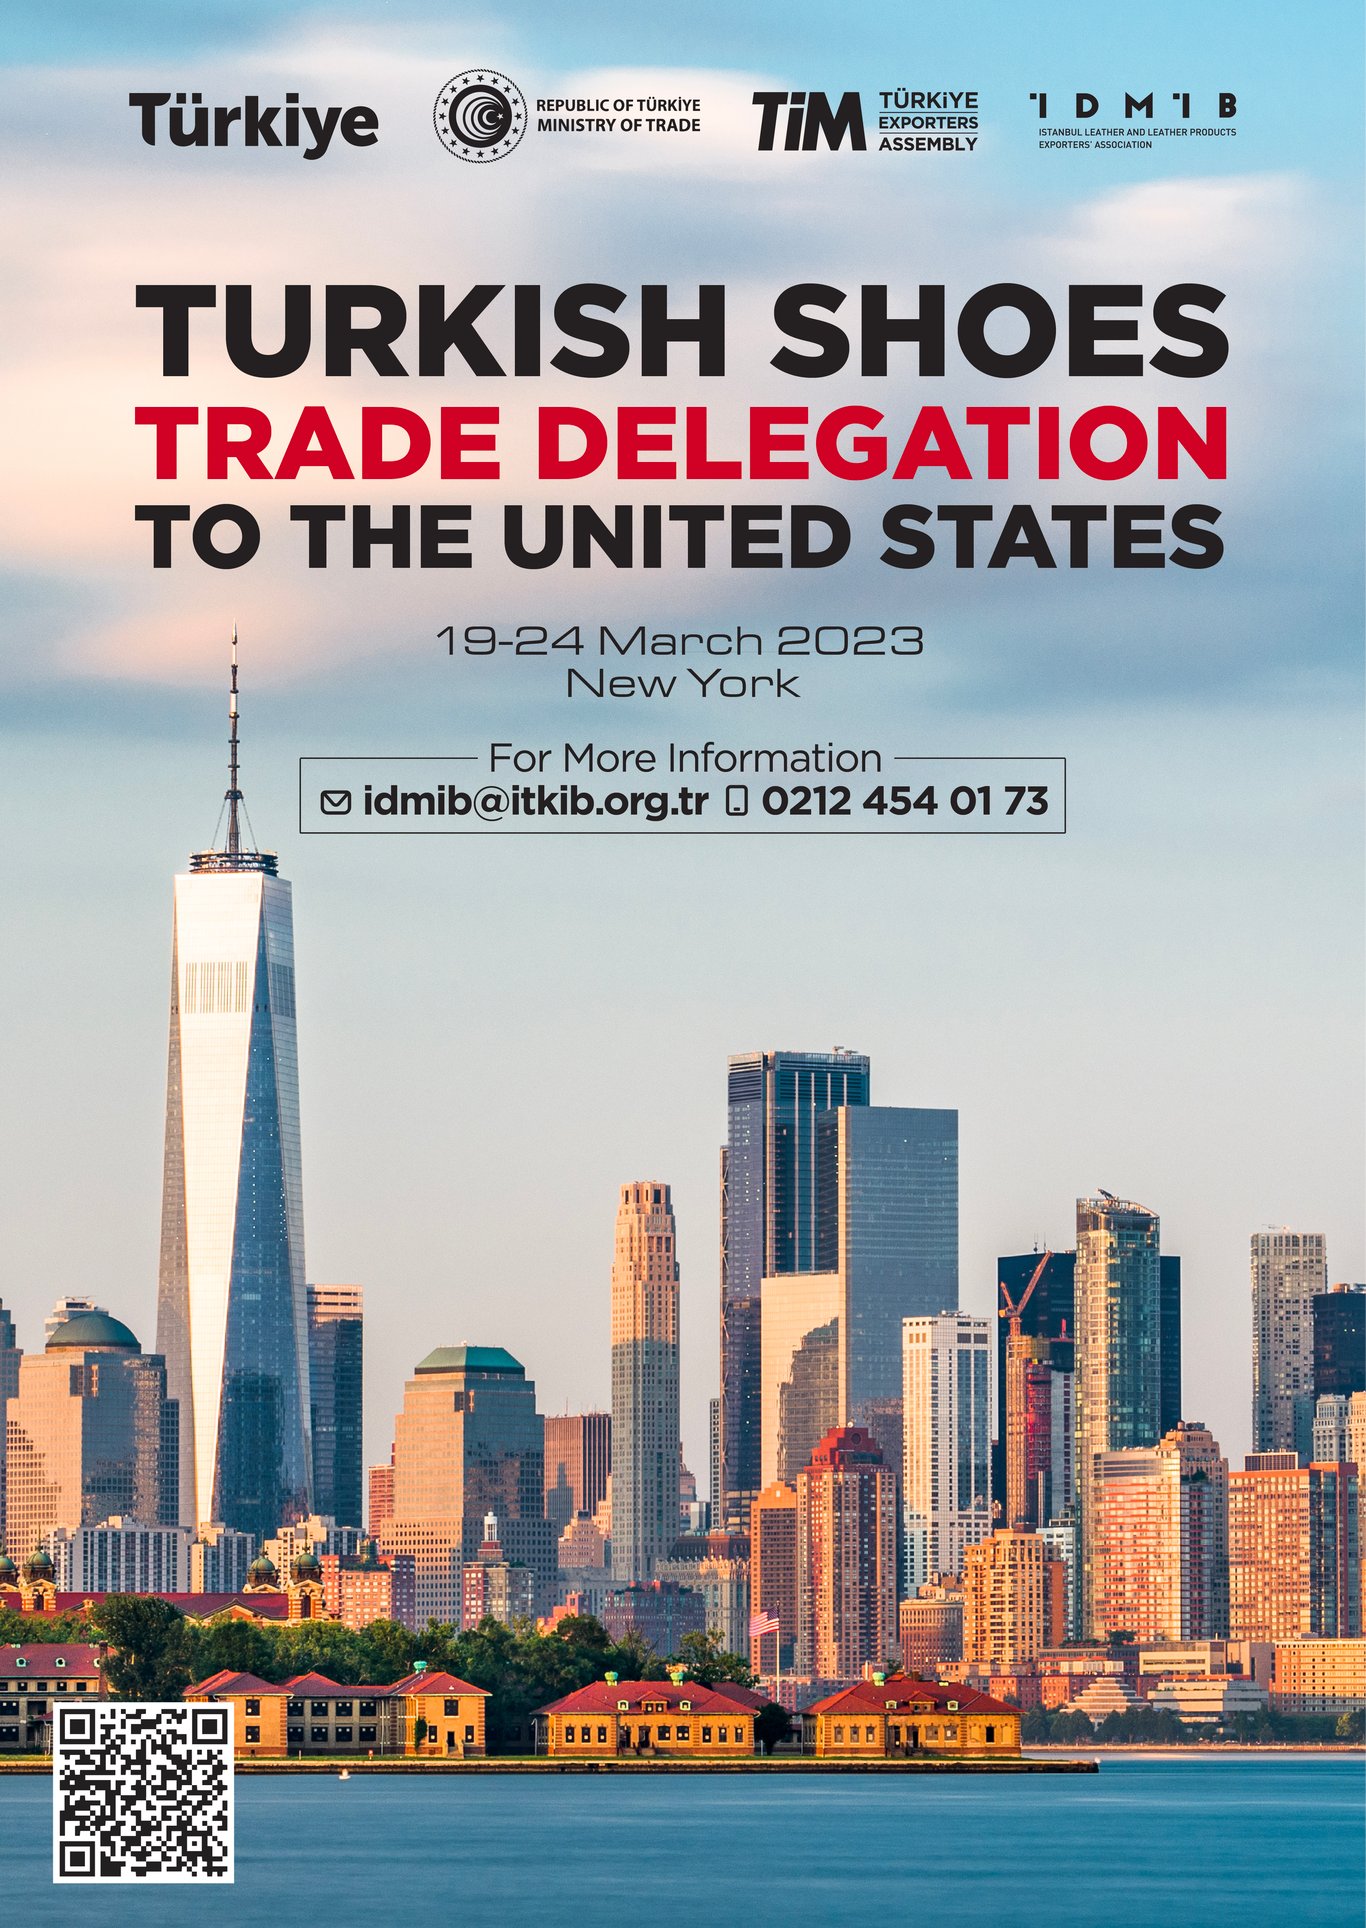 19-24 MARCH USA TURKISH SHOES TRADE DELEGATION